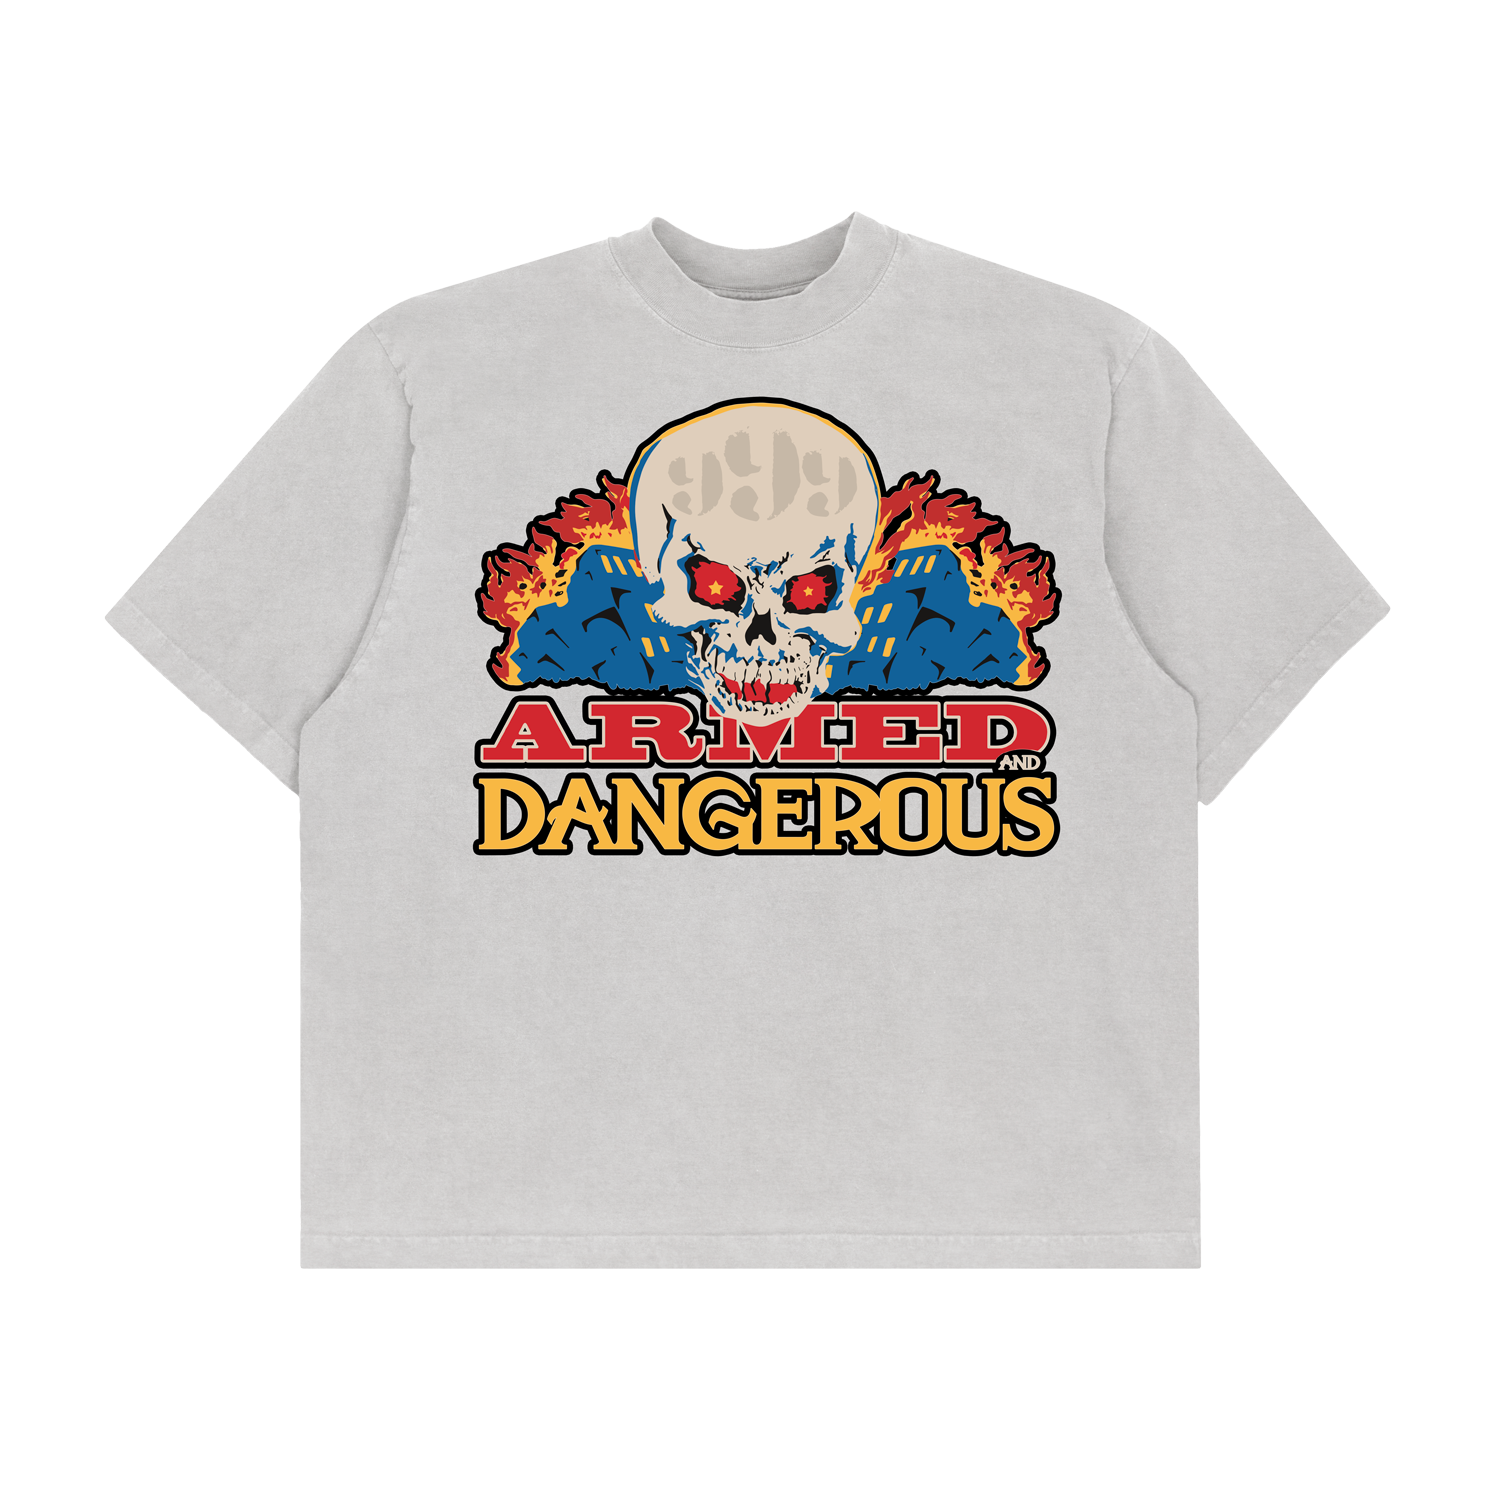 Armed And Dangerous Tee (White)